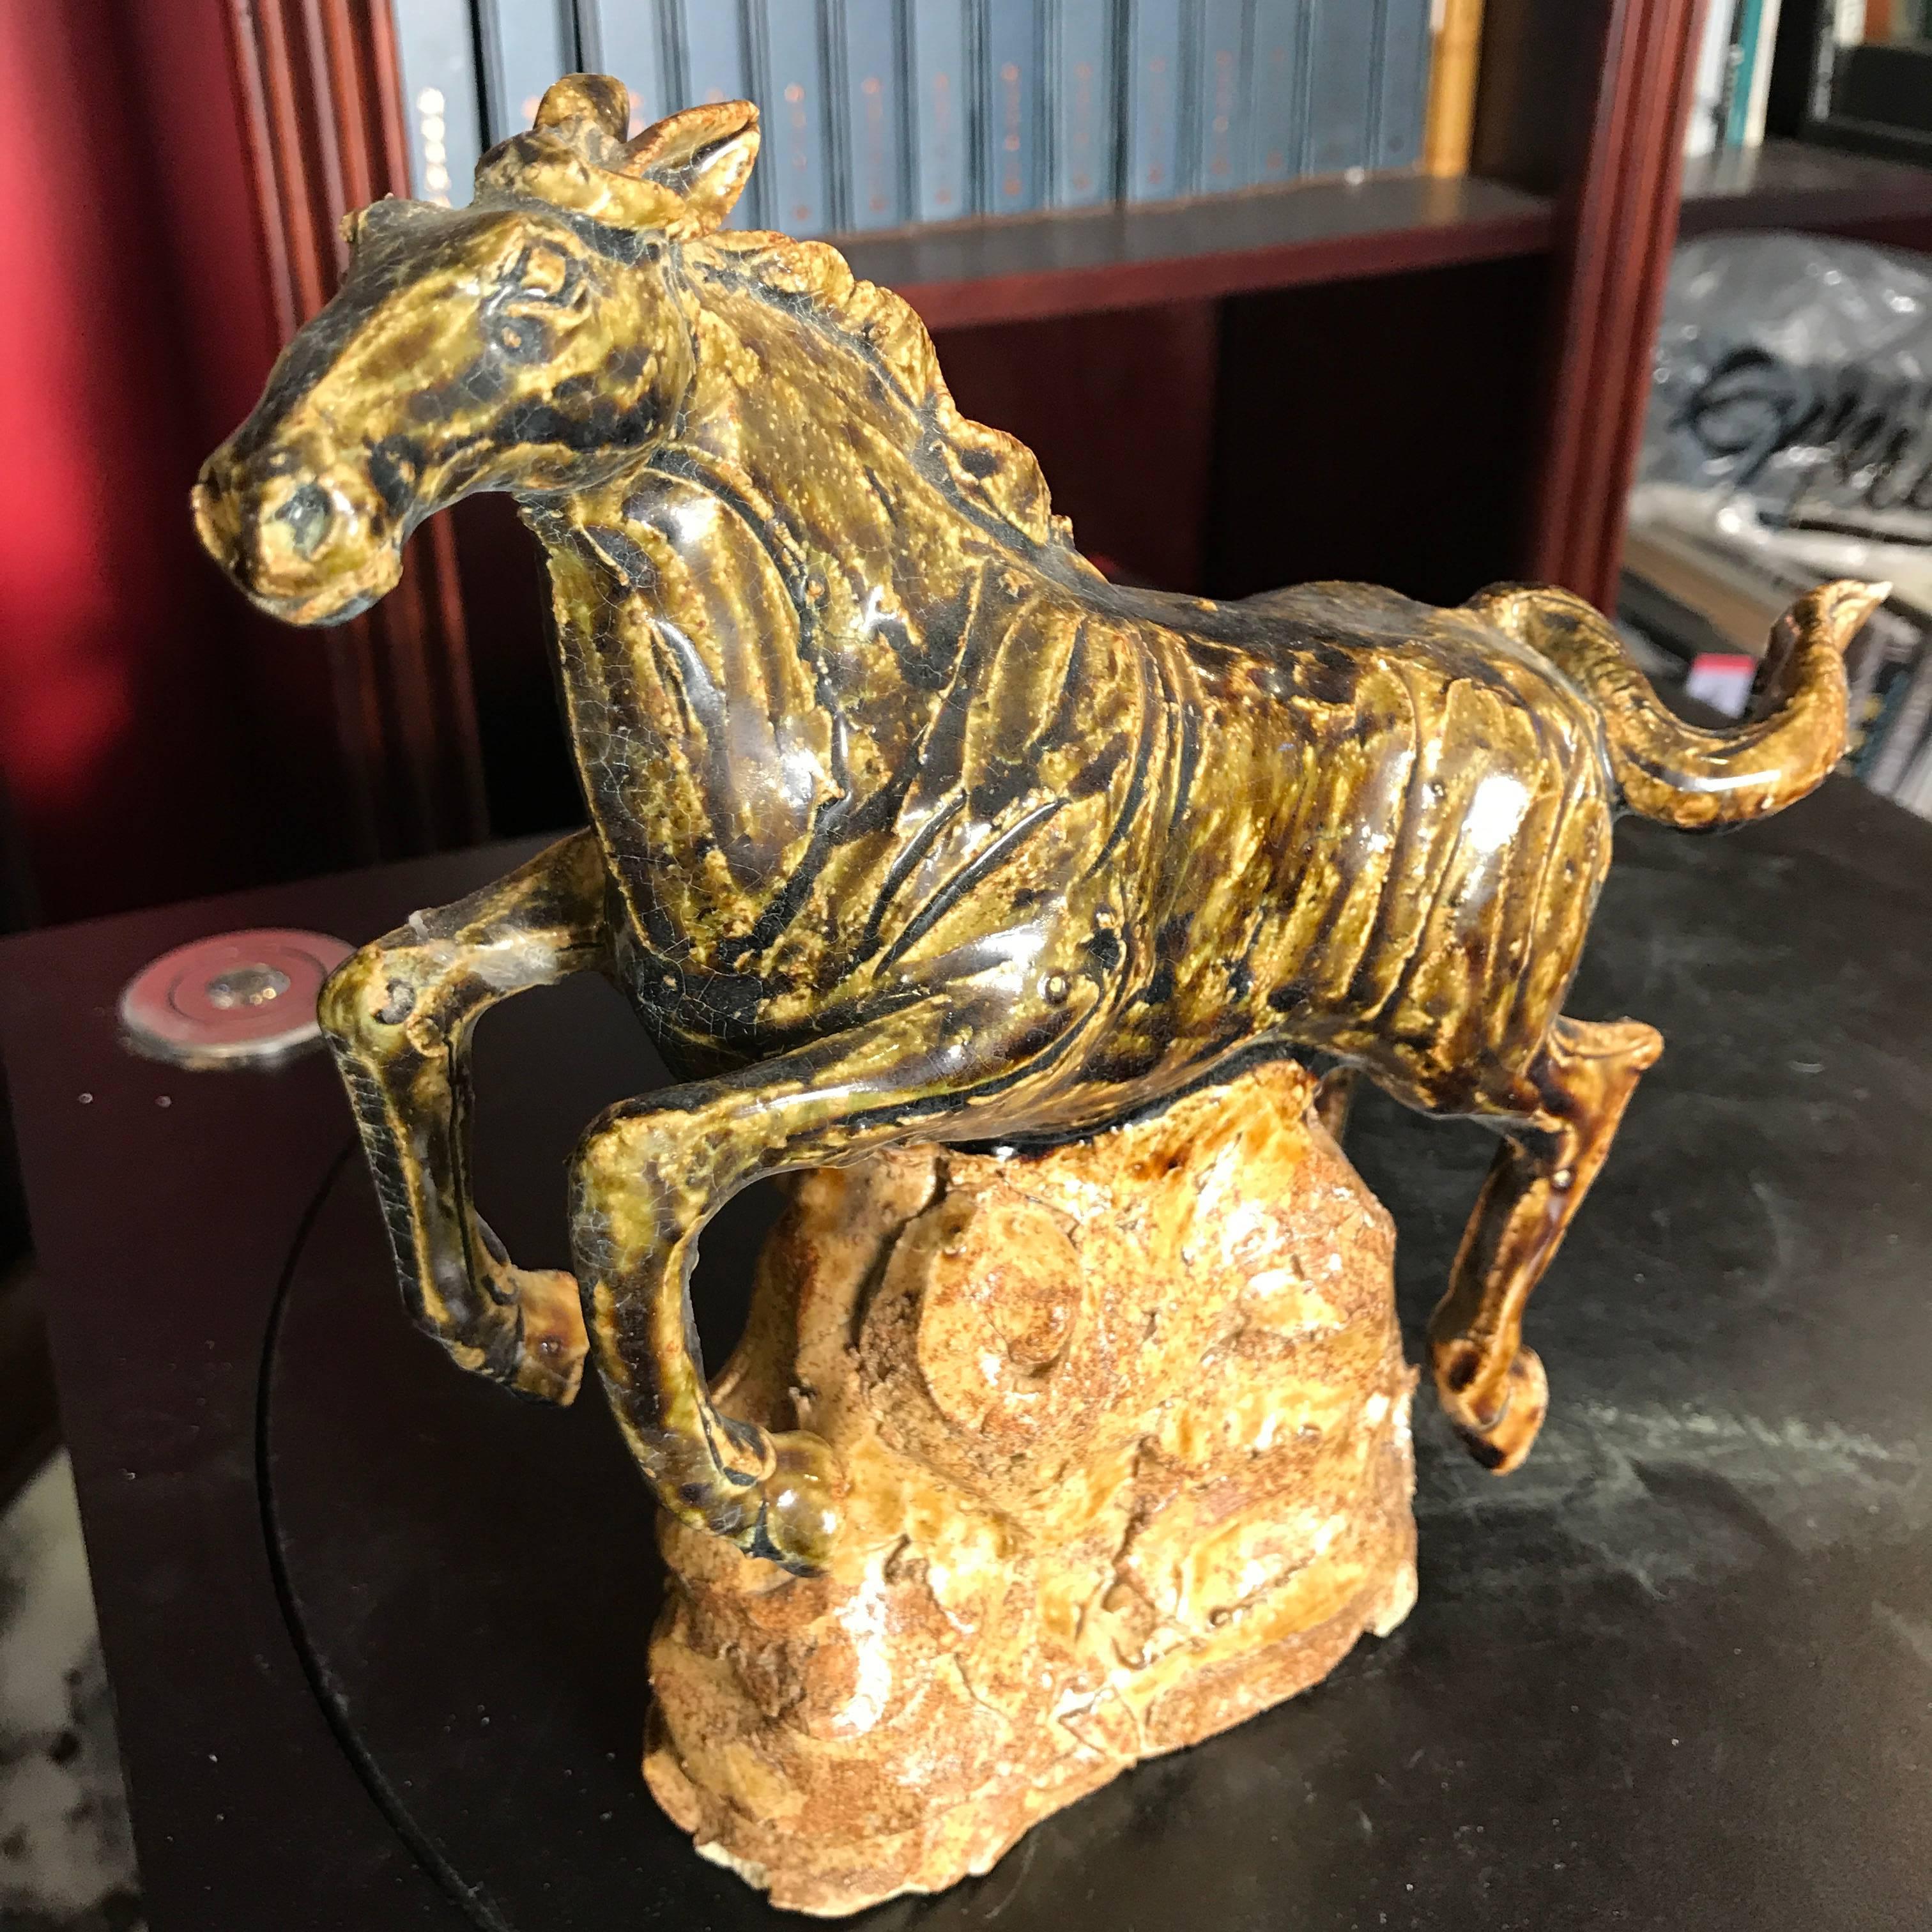 Showa Japan Fine Old Galloping Horse Handmade and Hand-Painted Ceramic Sculpture